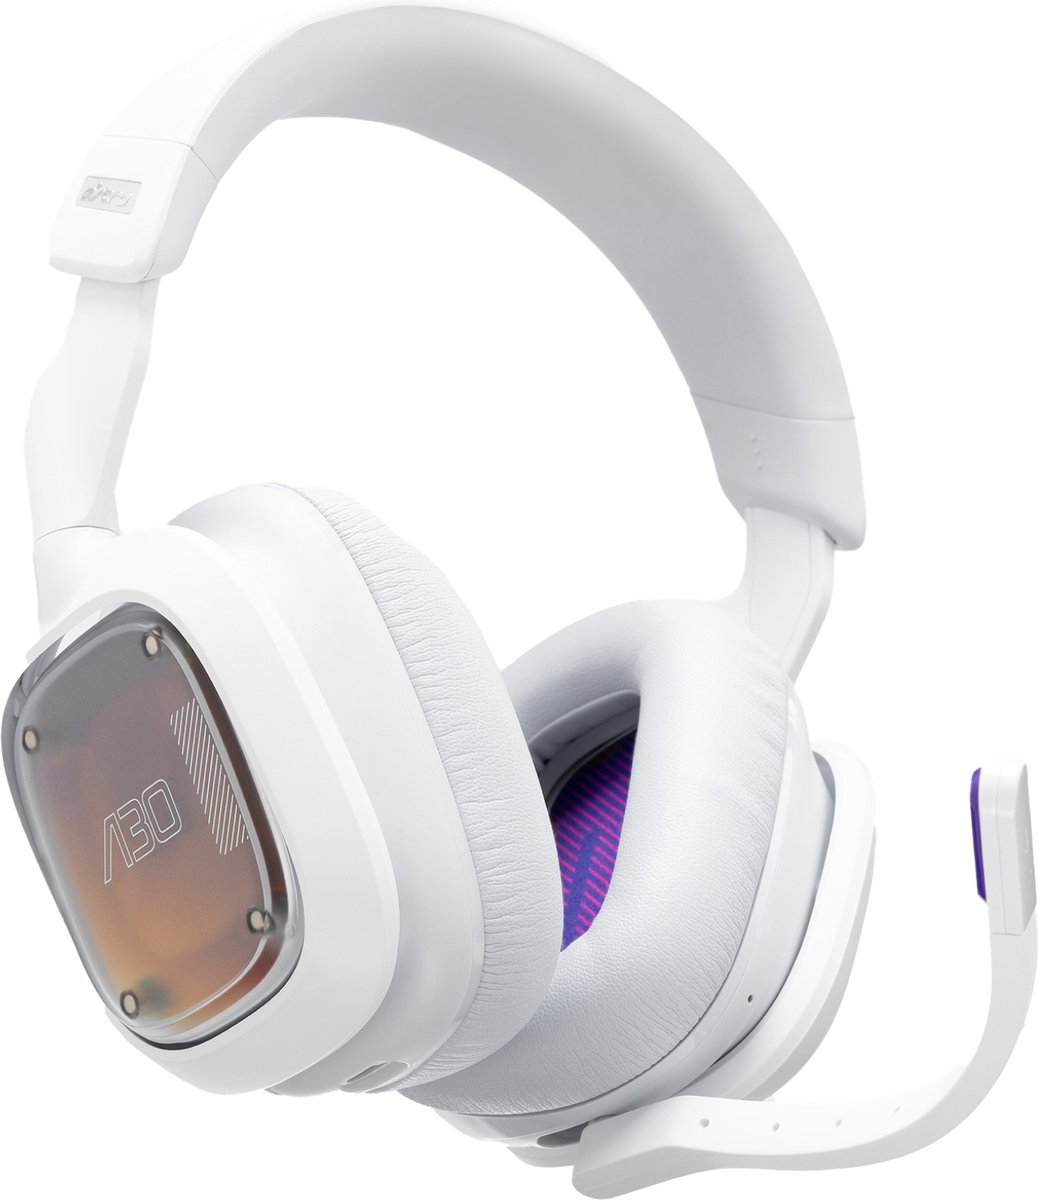 Astro A30 Lightspeed Draadloze Gaming Headset - PS Wit